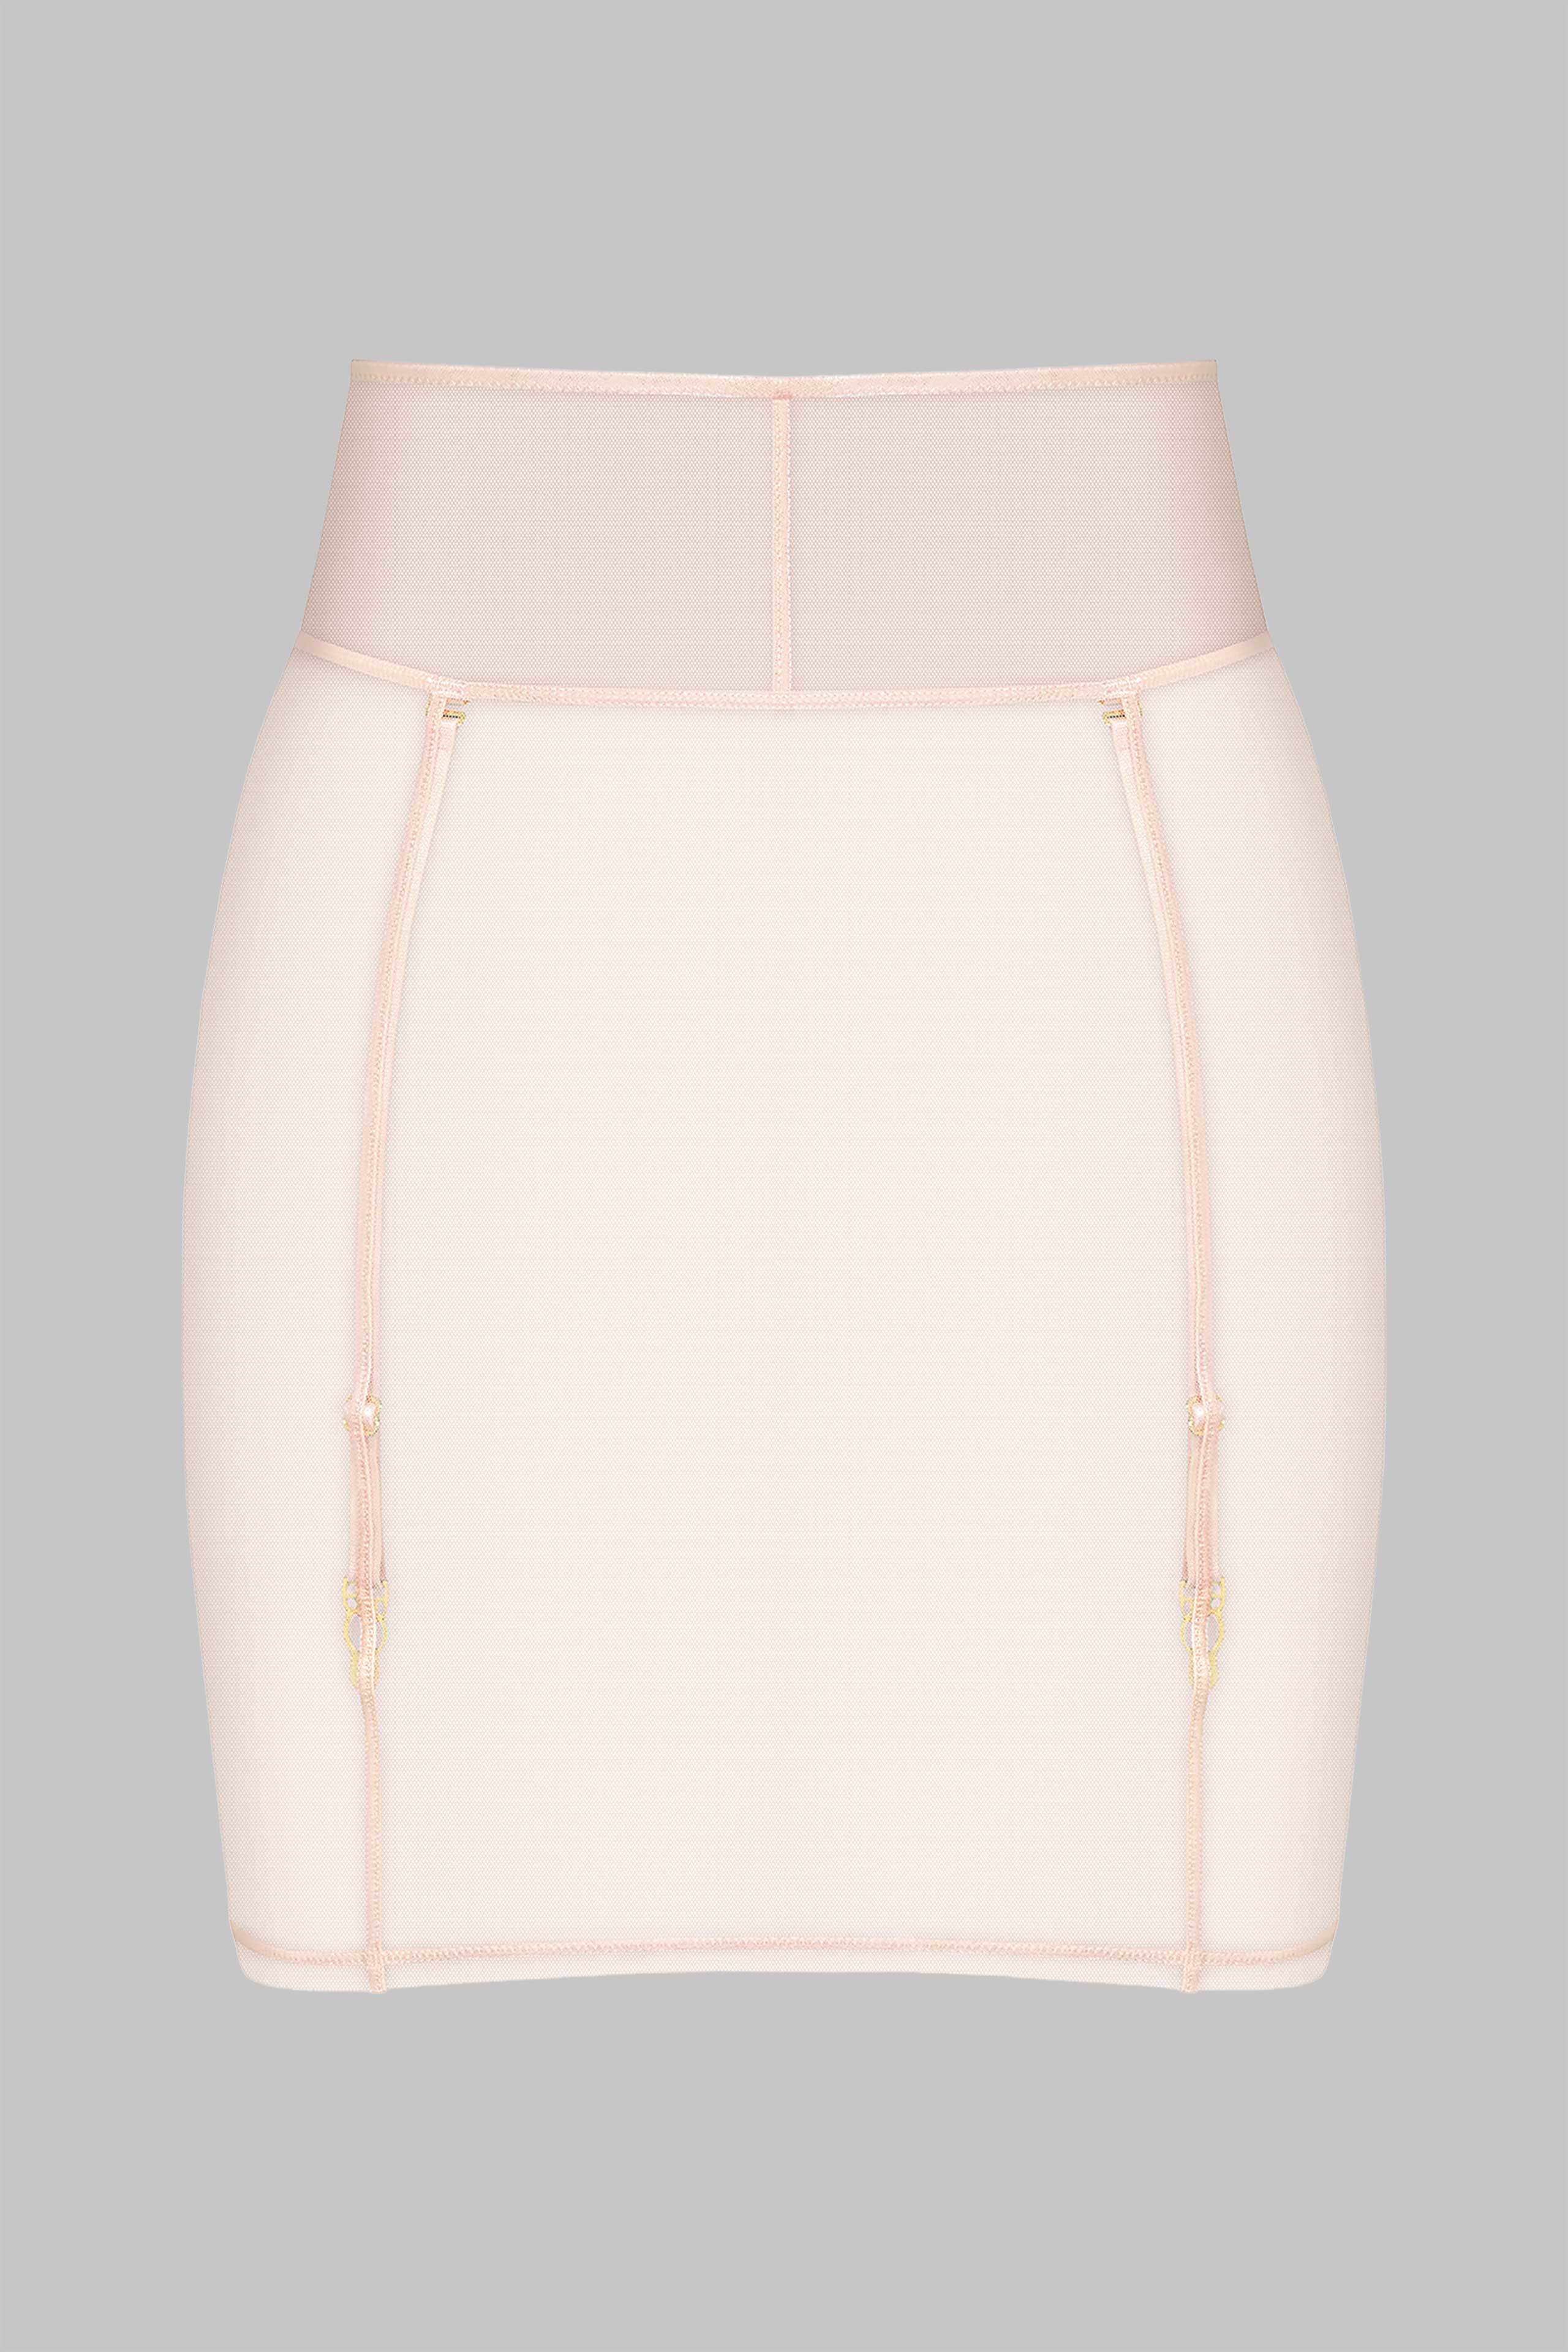 Skirt with Suspenders - L'Amoureuse